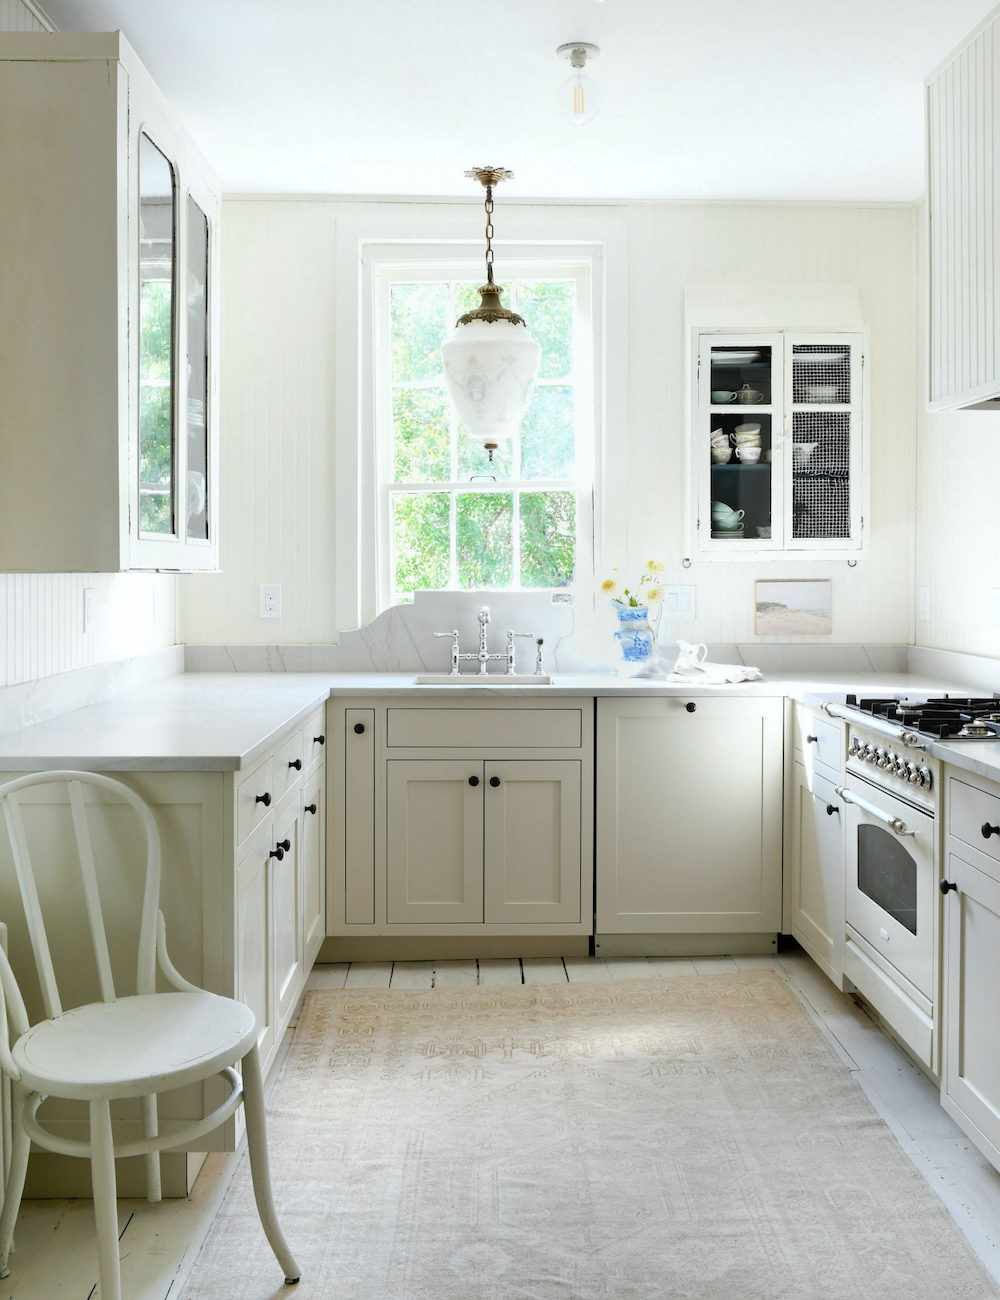 Leanne Ford - classic off-white kitchen photo - Erin Kelly - Spitzer Sawyer project